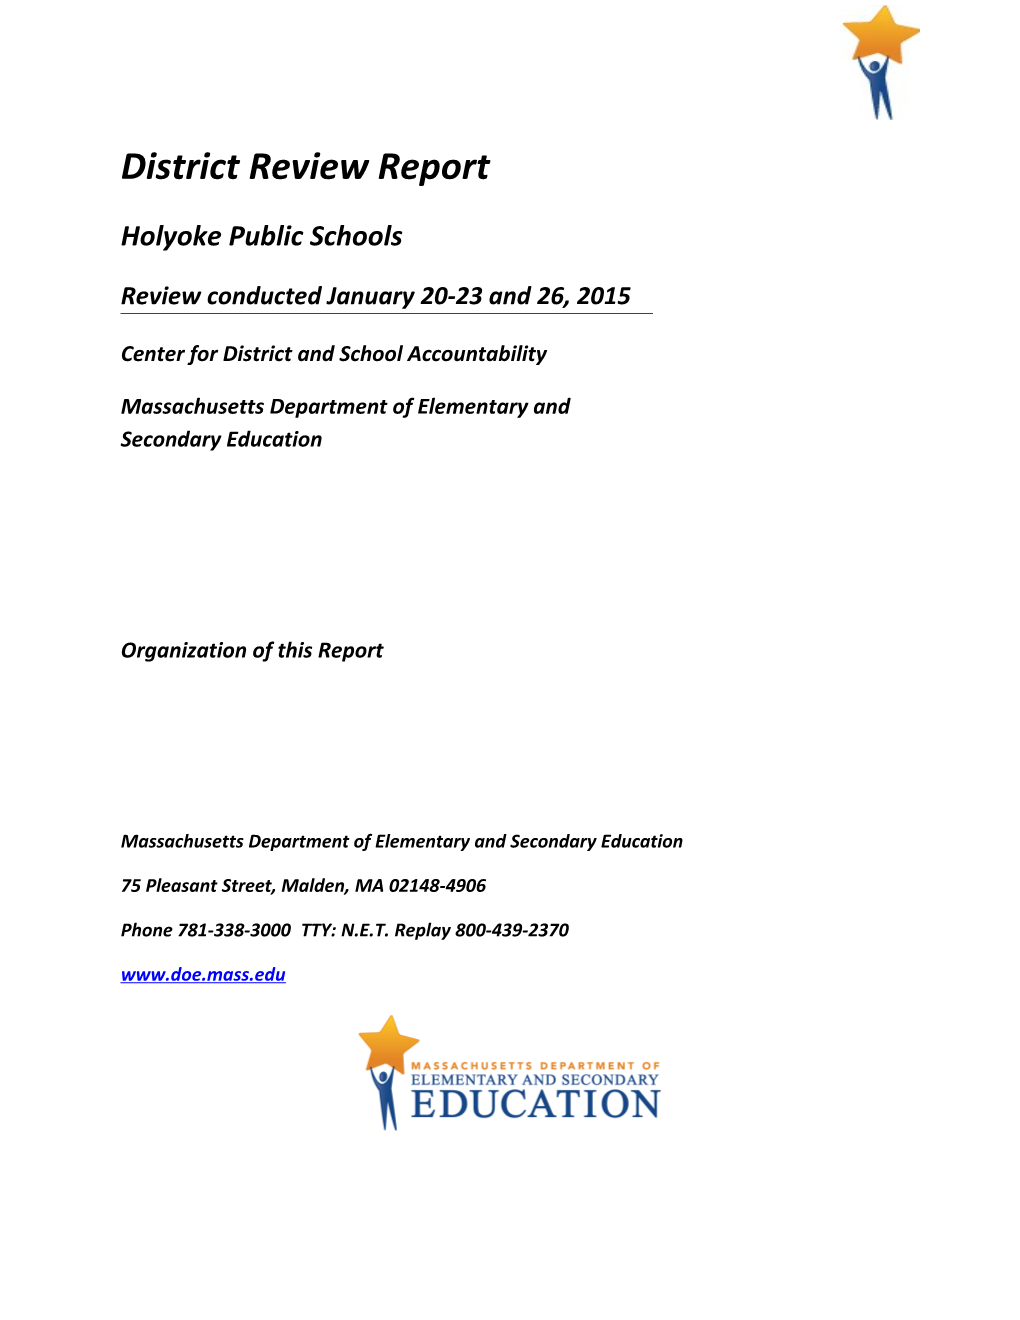 2015 Holyoke District Review Report